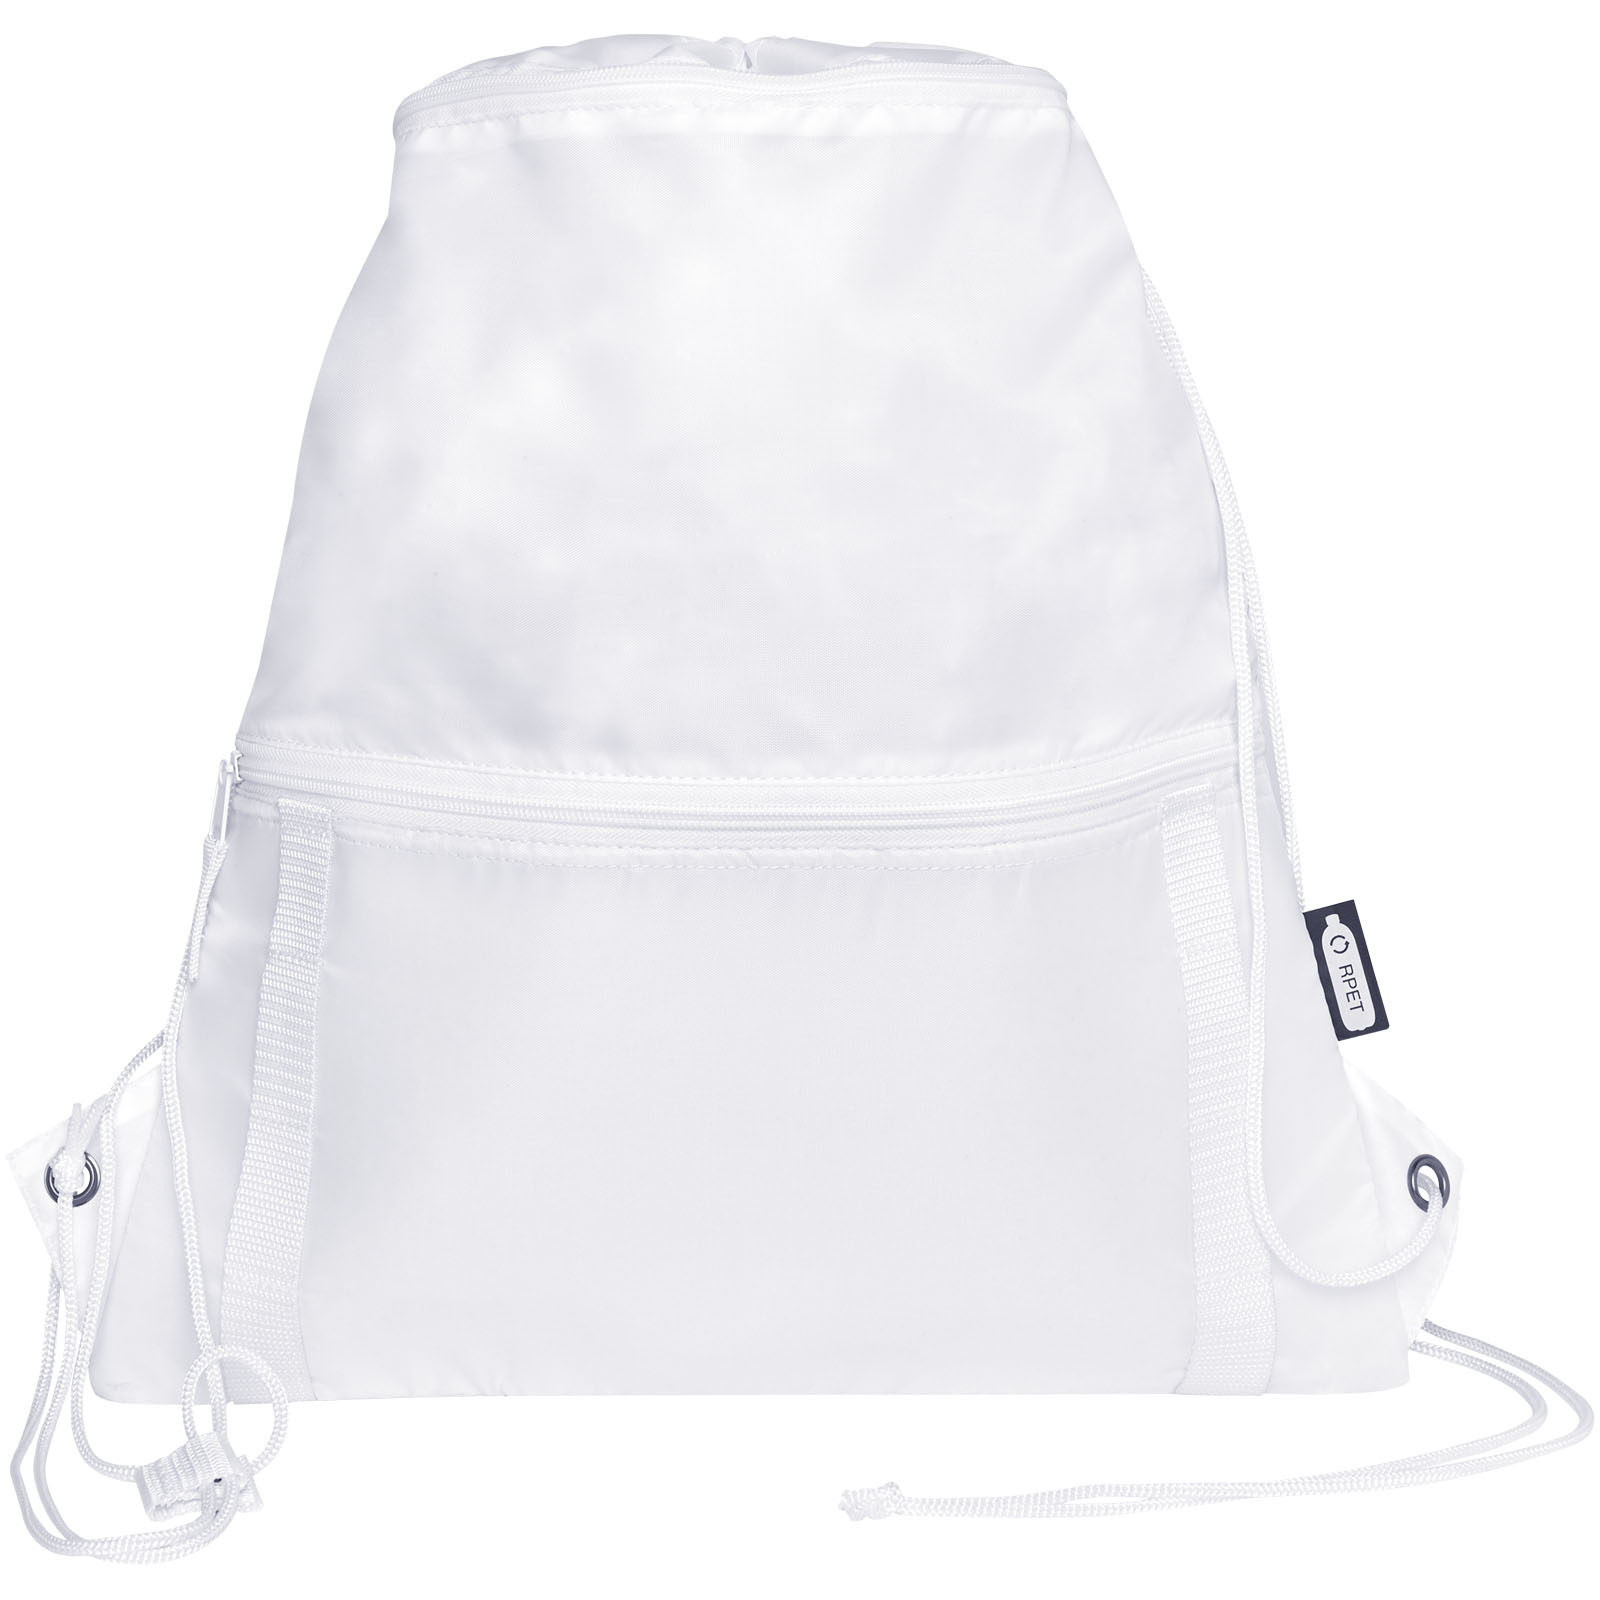 Advertising Drawstring Bags - Adventure recycled insulated drawstring bag 9L - 1